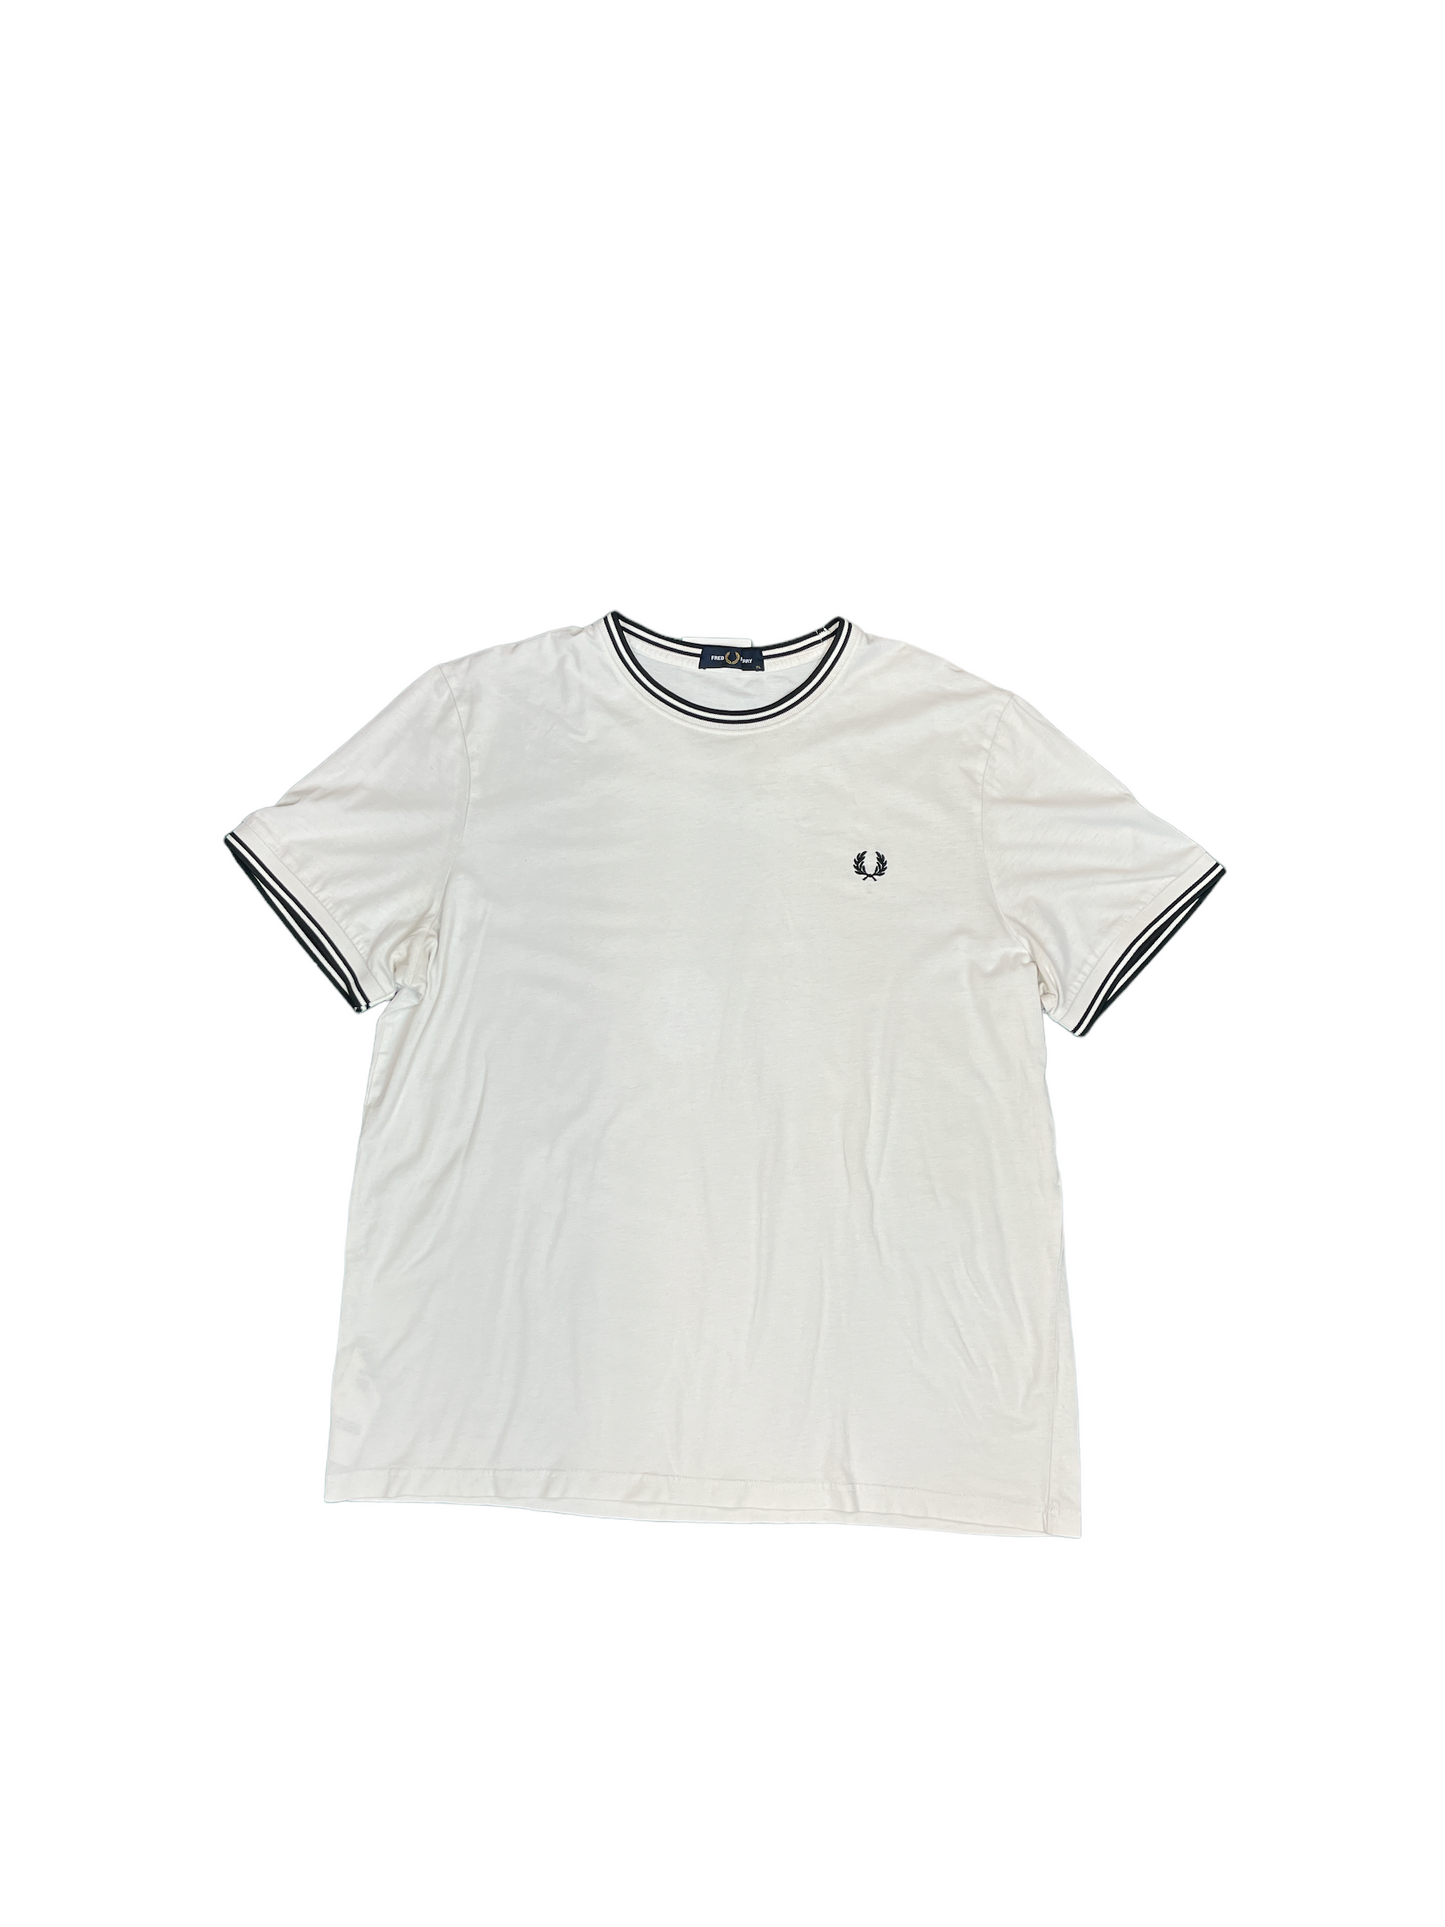 Mens Fred Perry T-Shirt - XL